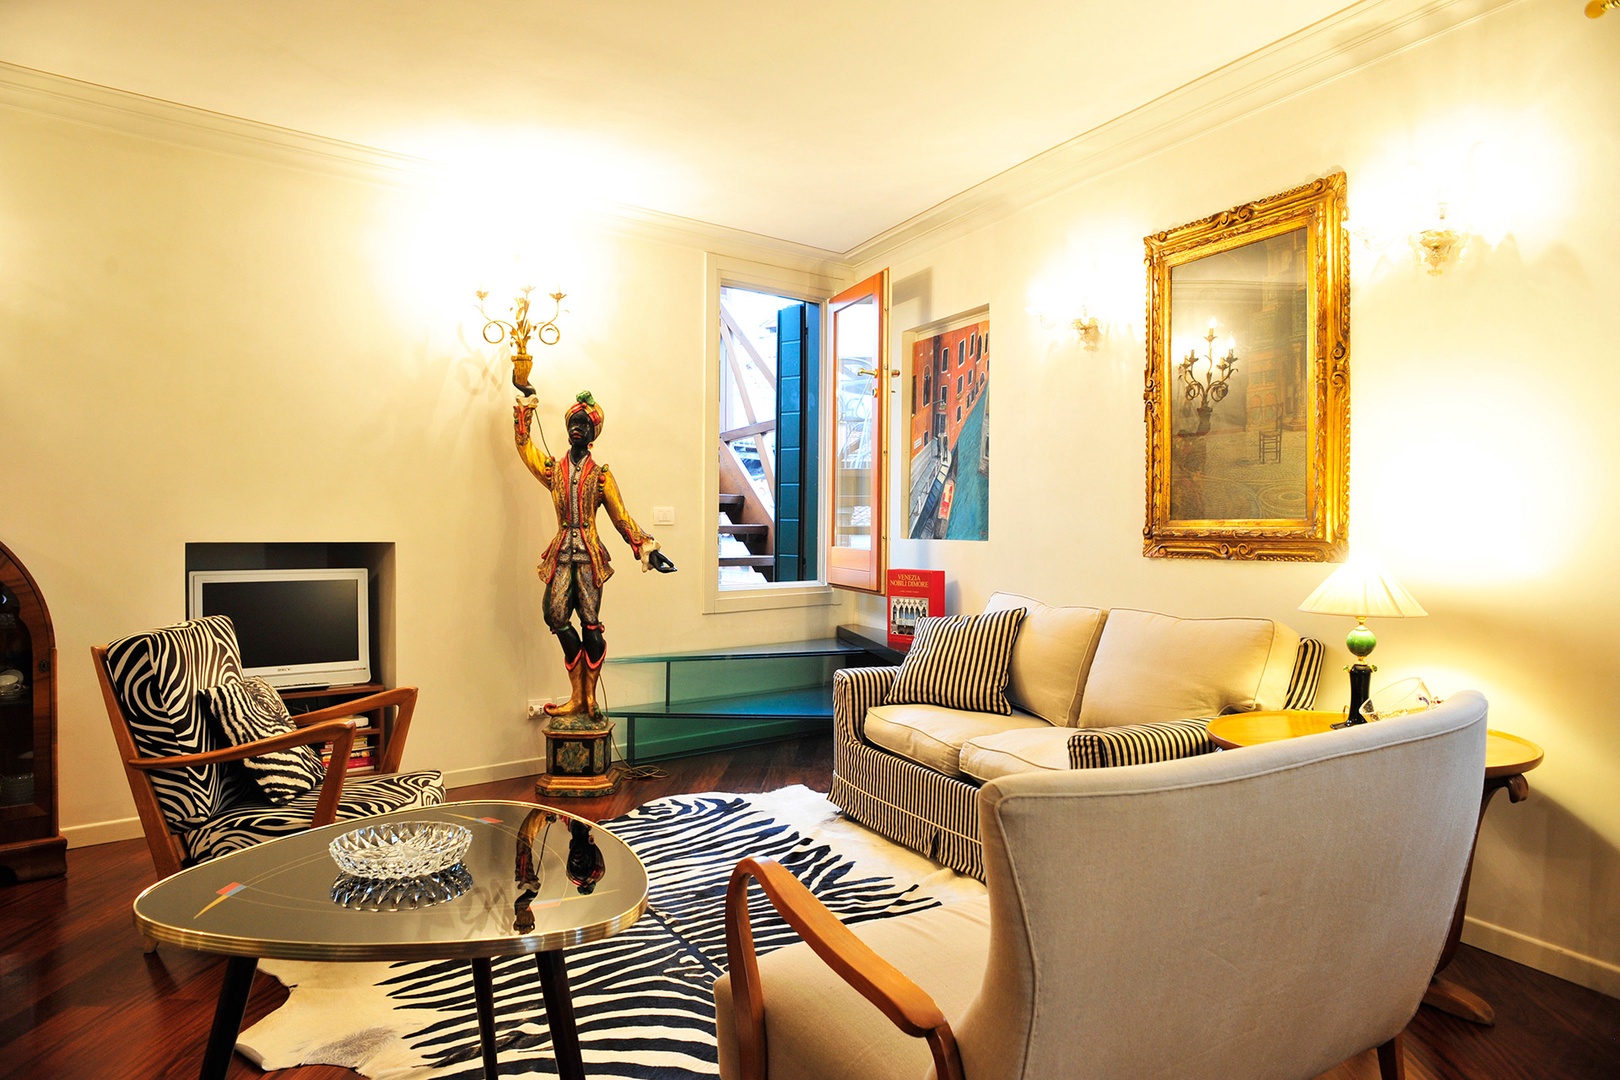 Eclectic decorating echoes Venice's former domination of the Mediterranean trade route.